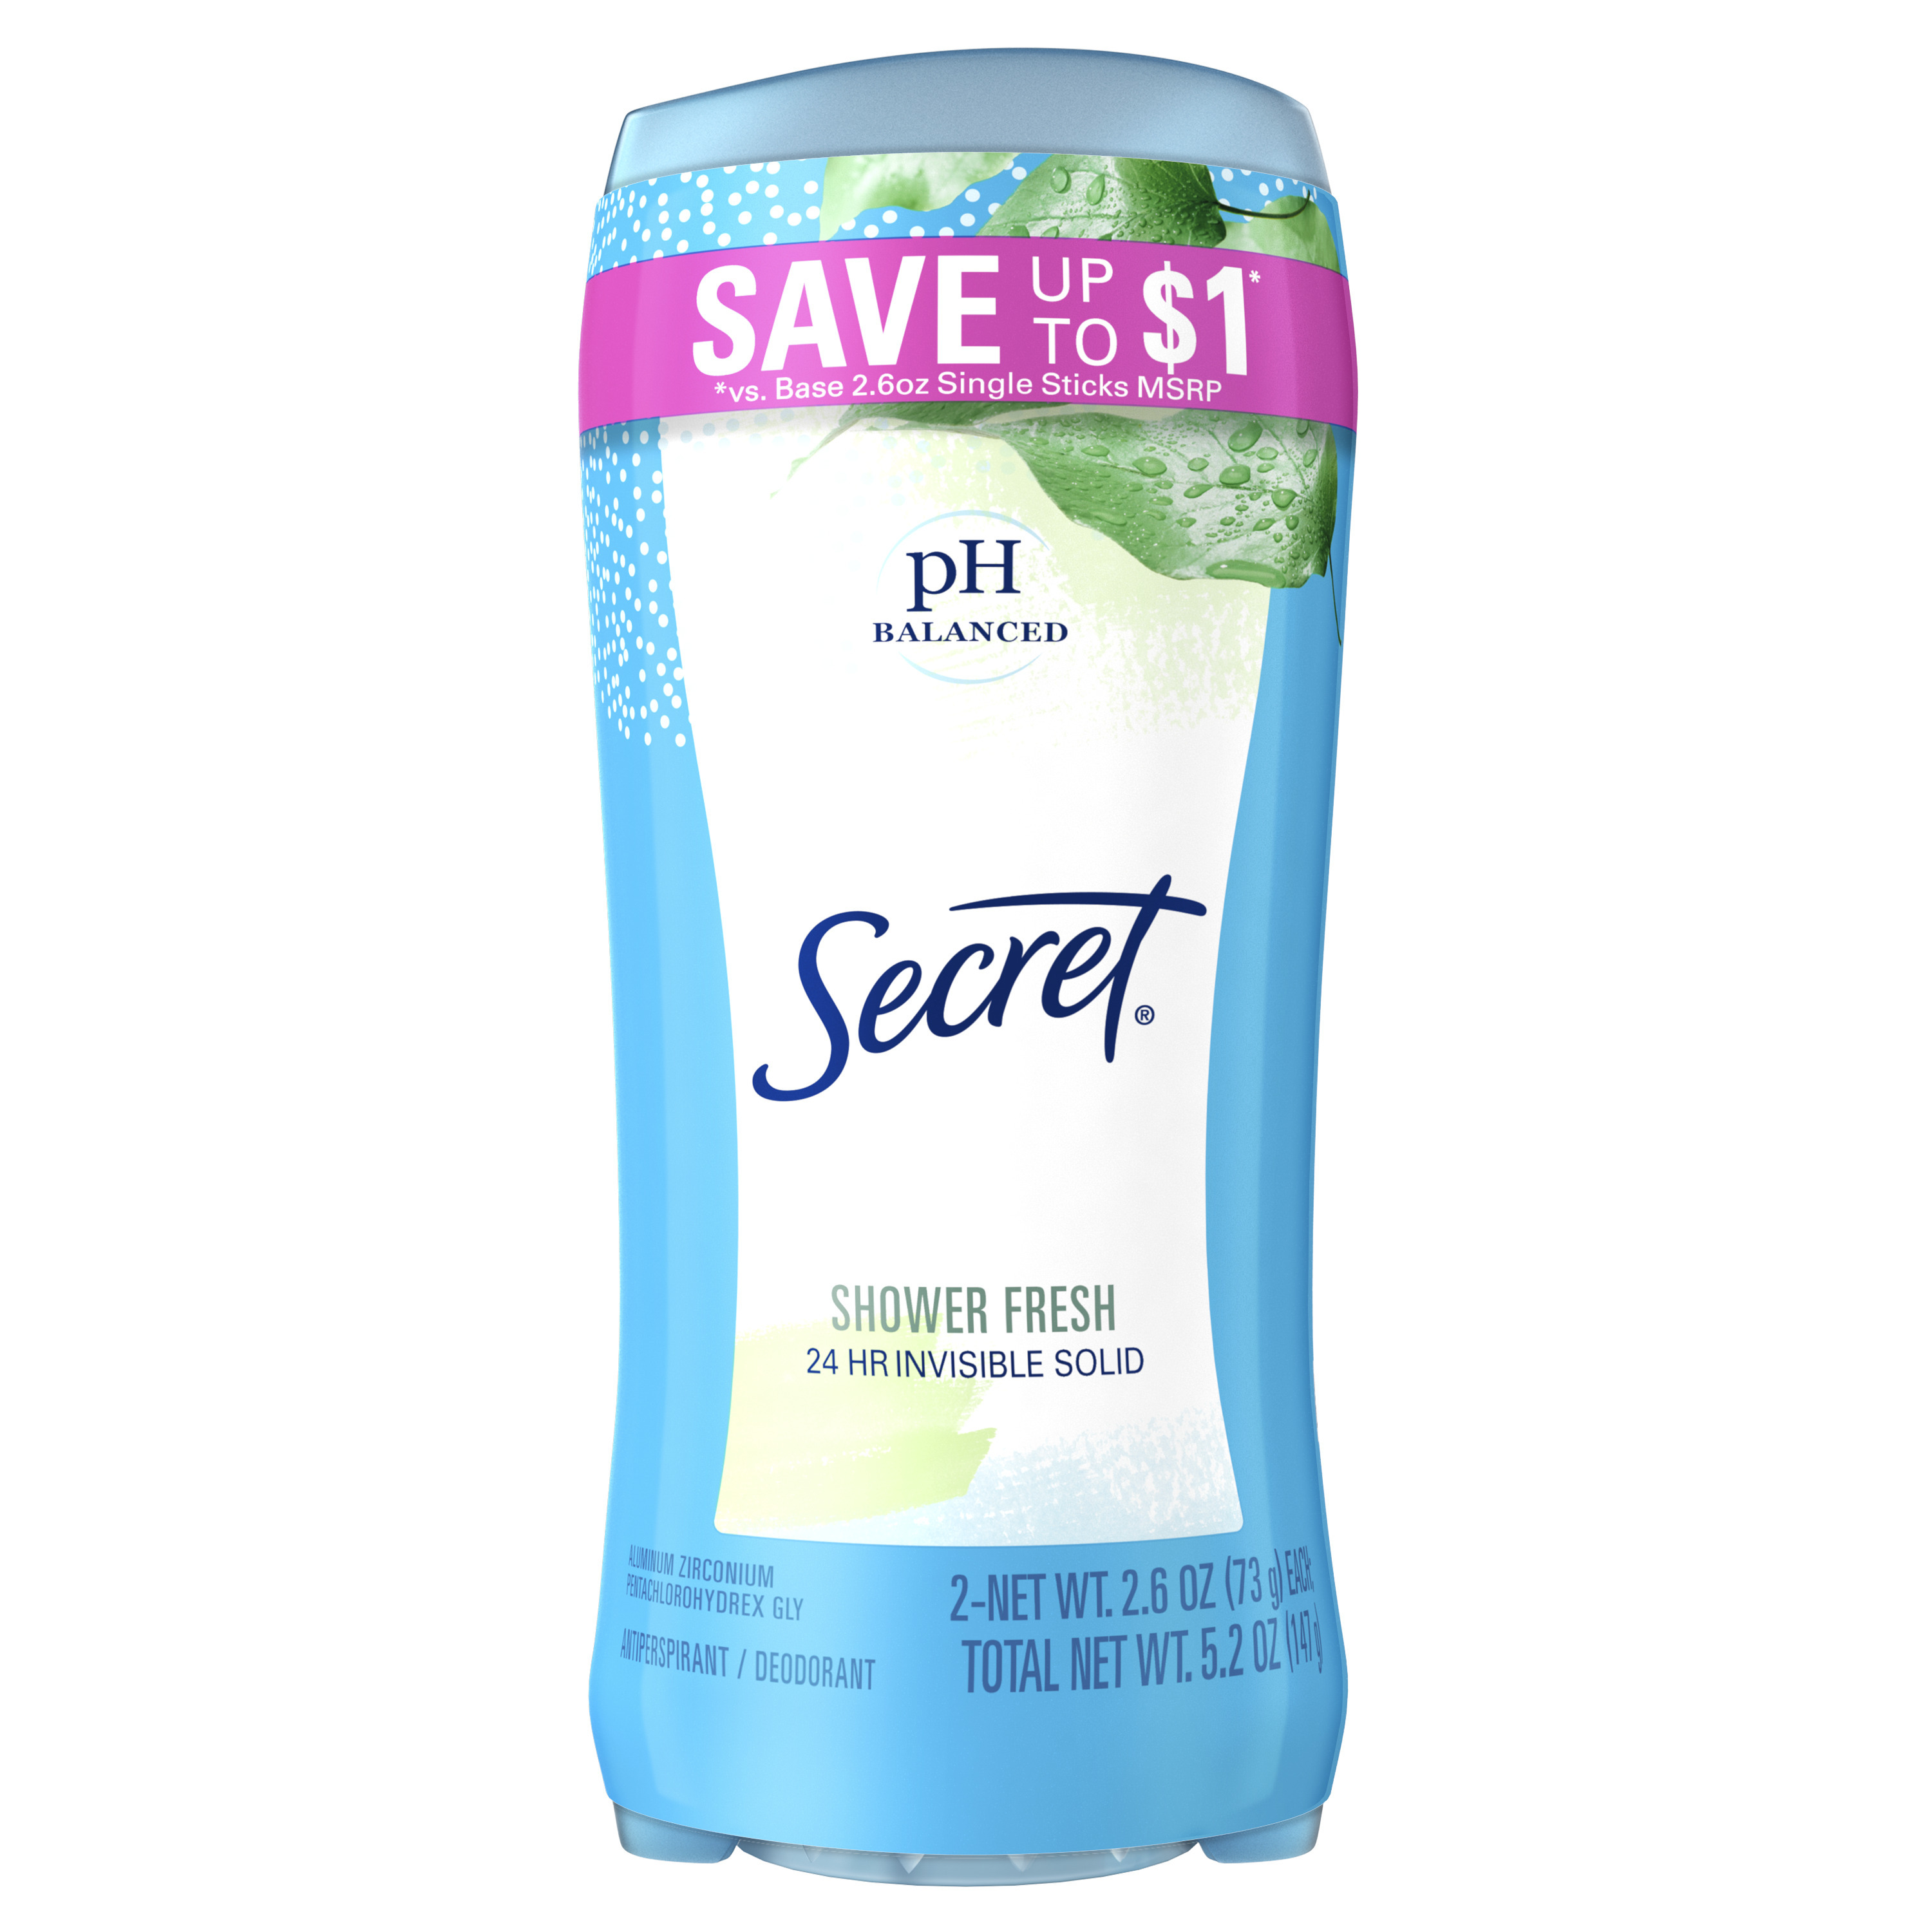 Secret Invisible Solid Antiperspirant and Deodorant for Women, Shower Fresh, Twin Pack, 2.6 oz Each - image 1 of 8